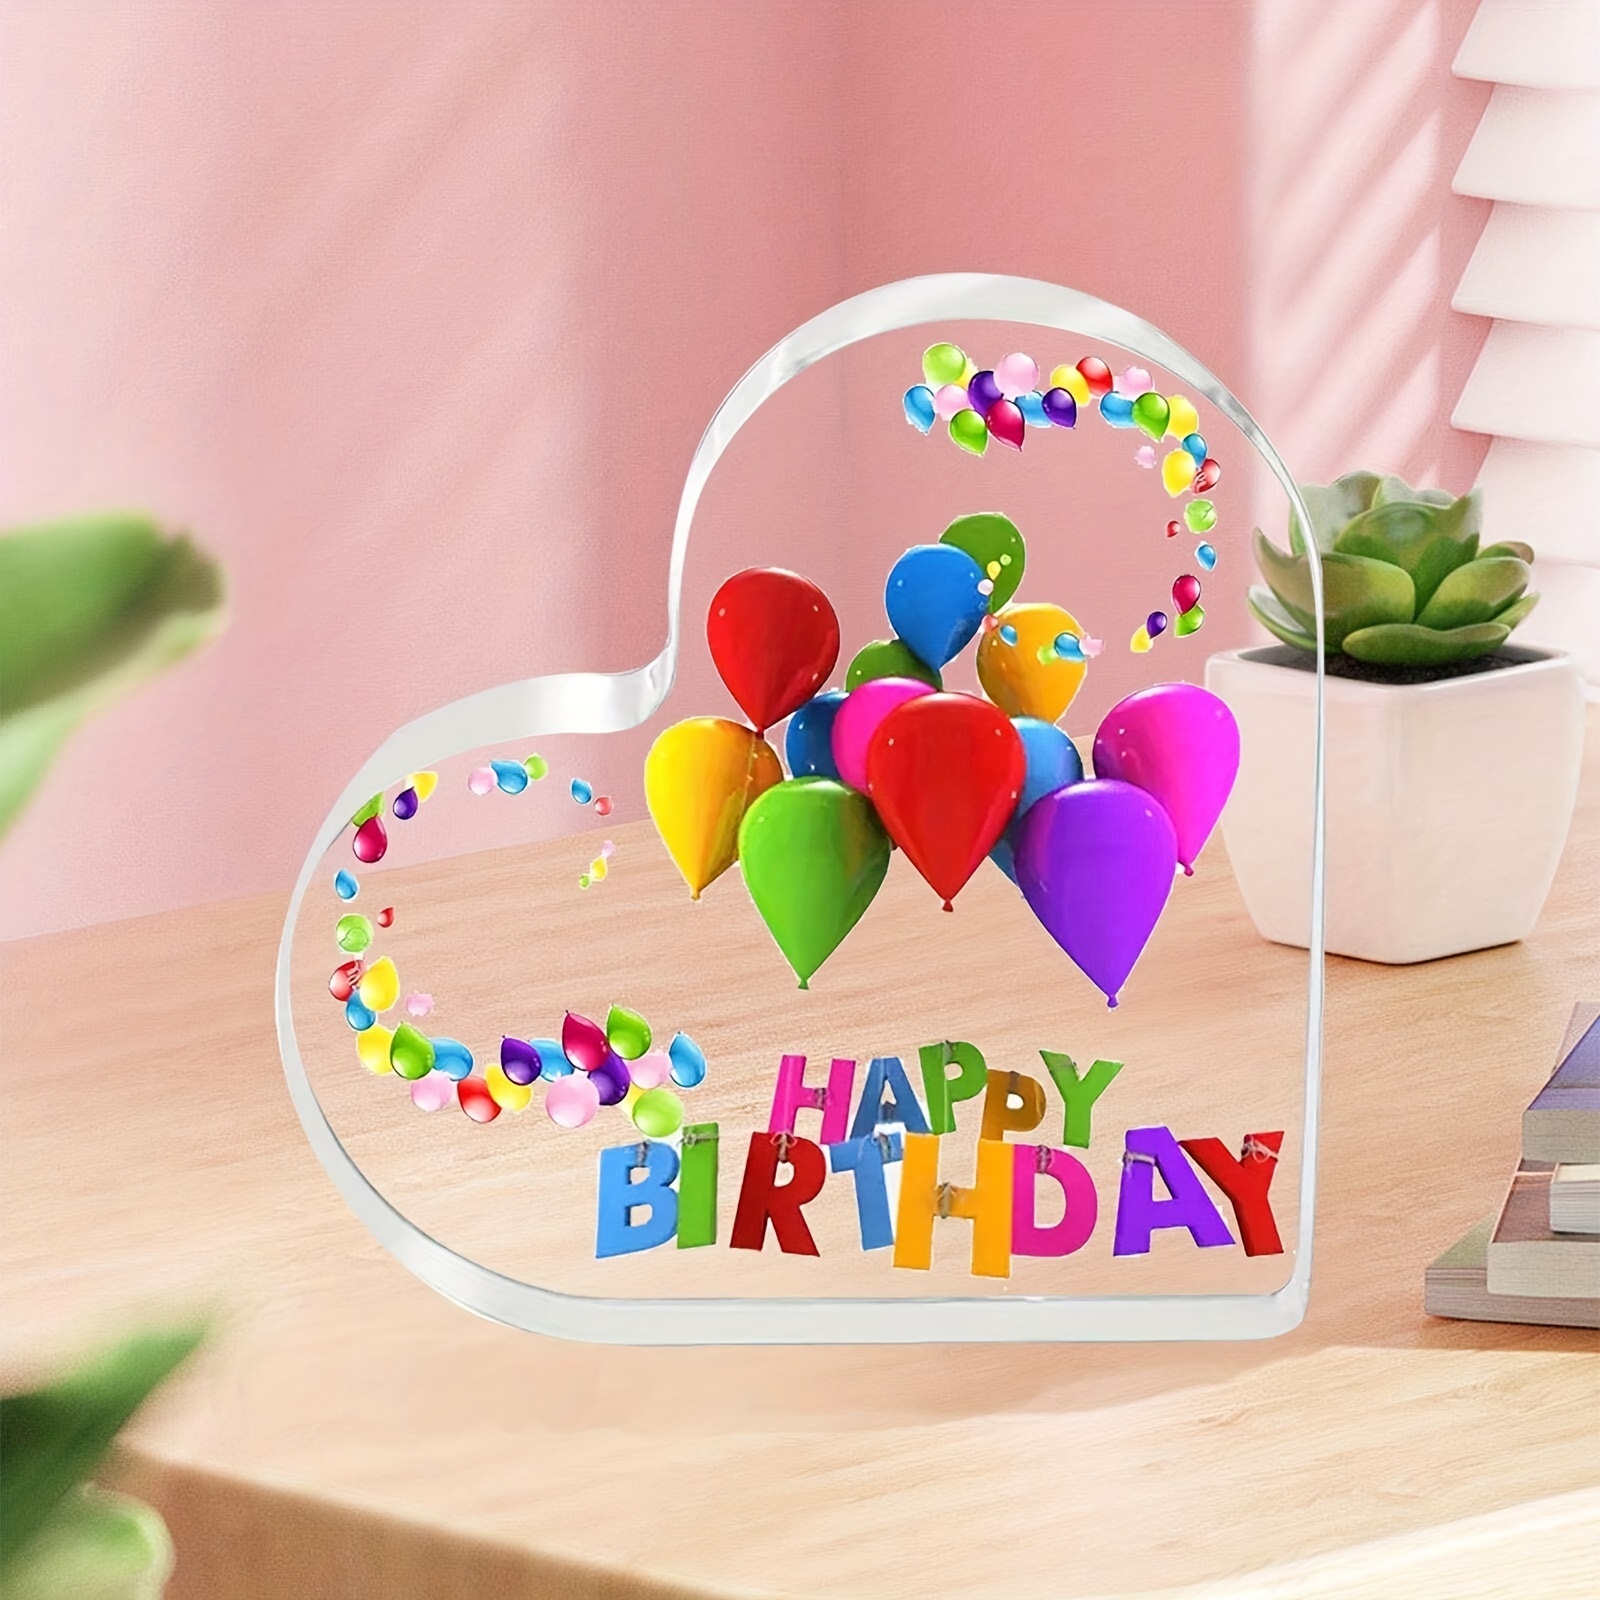 

1pc Acrylic Happy Birthday Balloon Office Desktop Gift Decoration Ornament To Send Sister, Friends, Family Bedroom Decorations